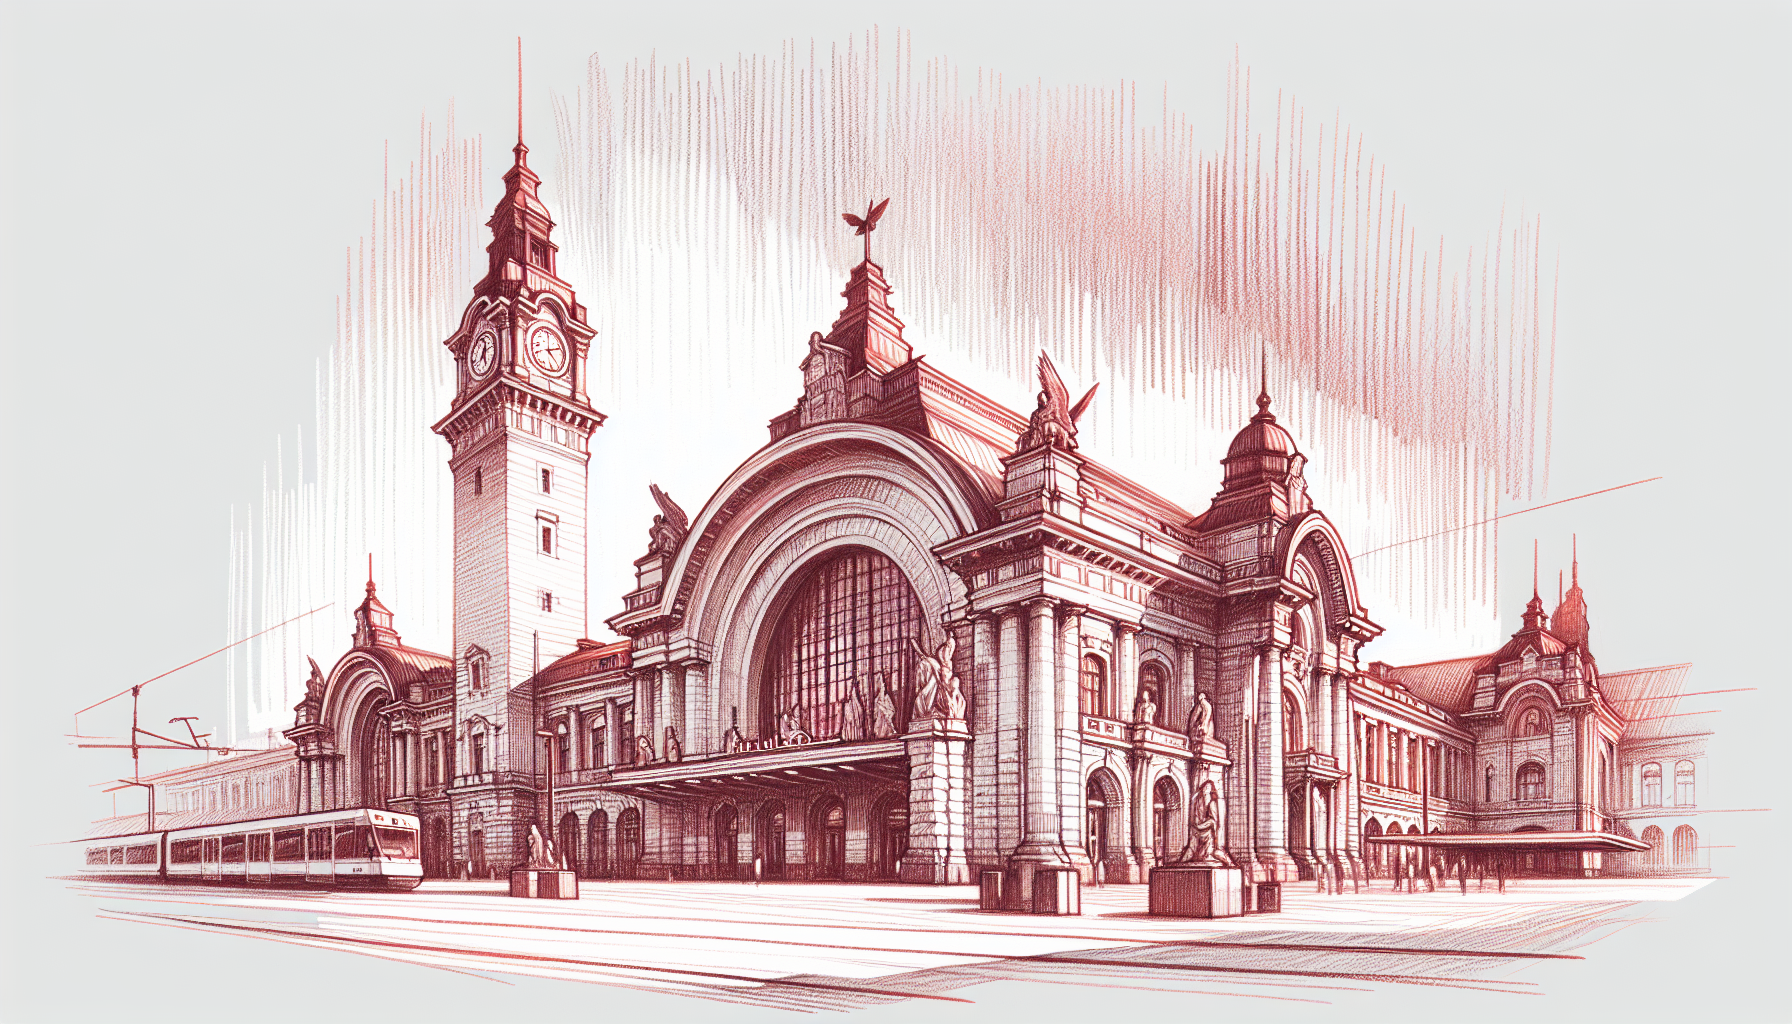 The architecture of Helsinki Central Station